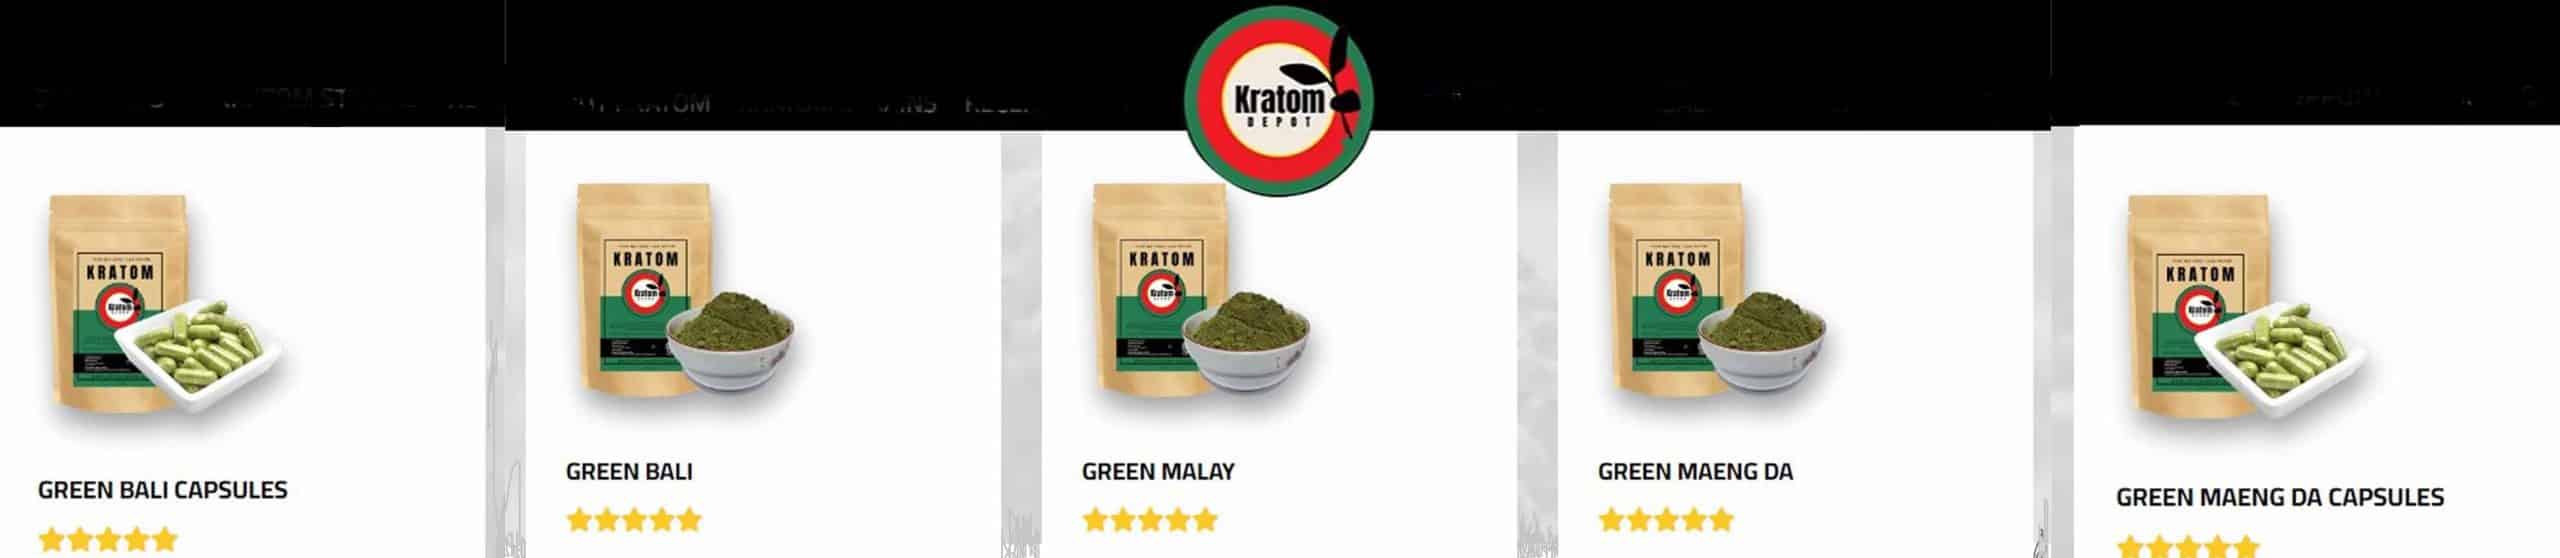 image of the kratom depot products